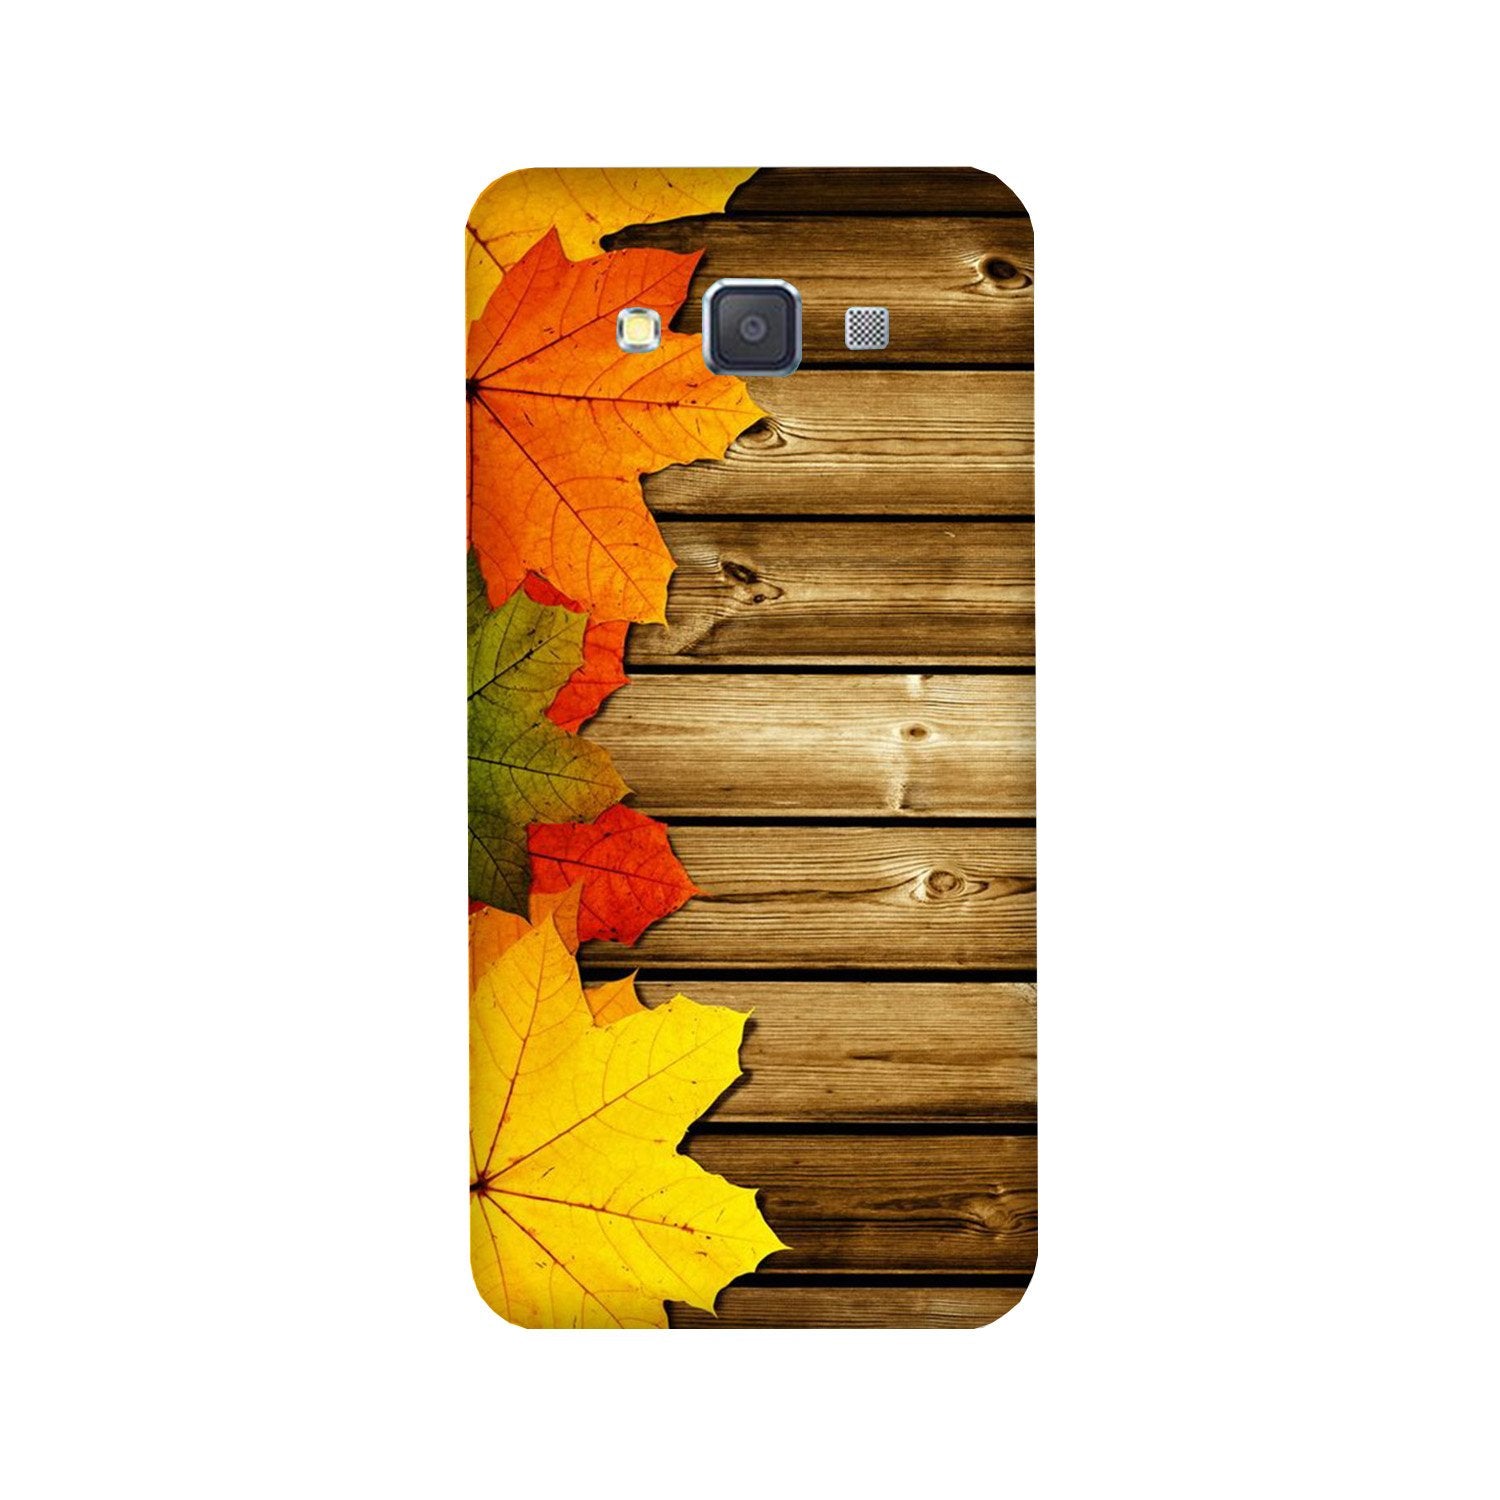 Wooden look3 Case for Galaxy E7